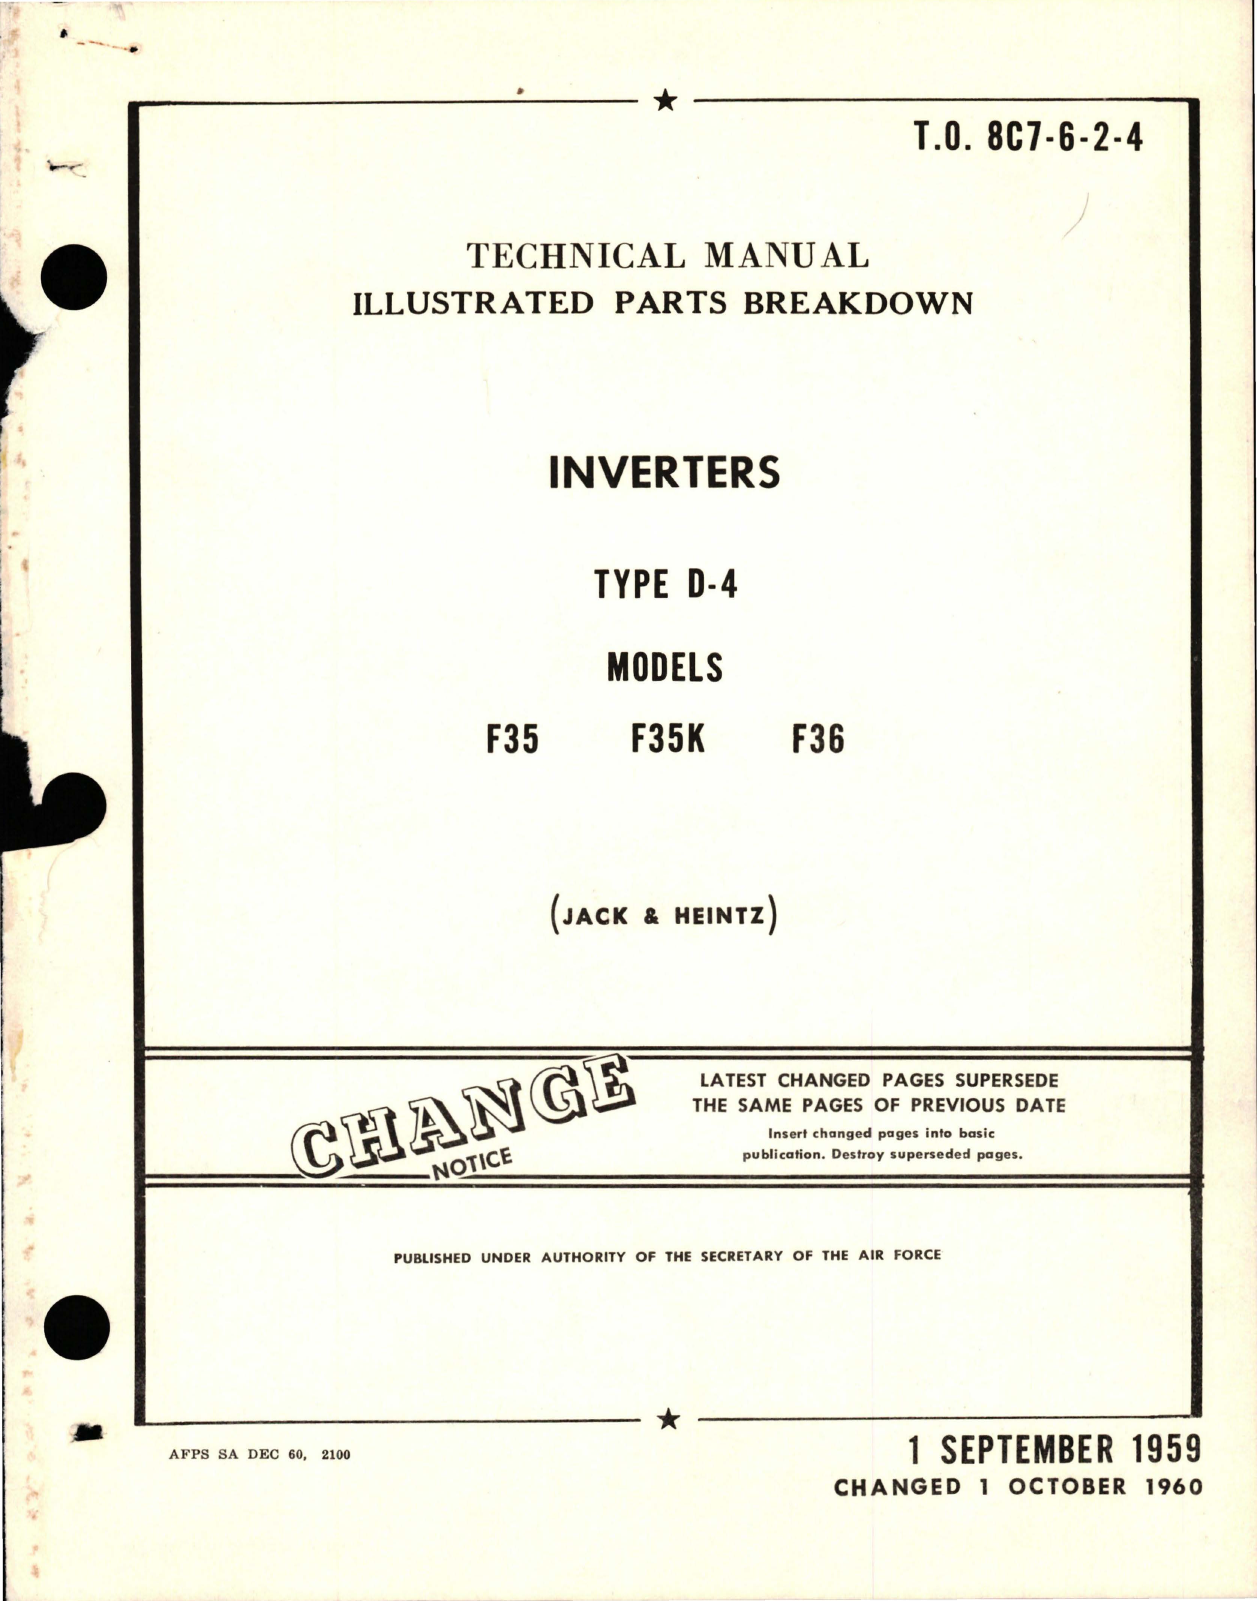 Sample page 1 from AirCorps Library document: Illustrated Parts Breakdown for Inverters - Type D-4 - Models F35, F35K, and 36 